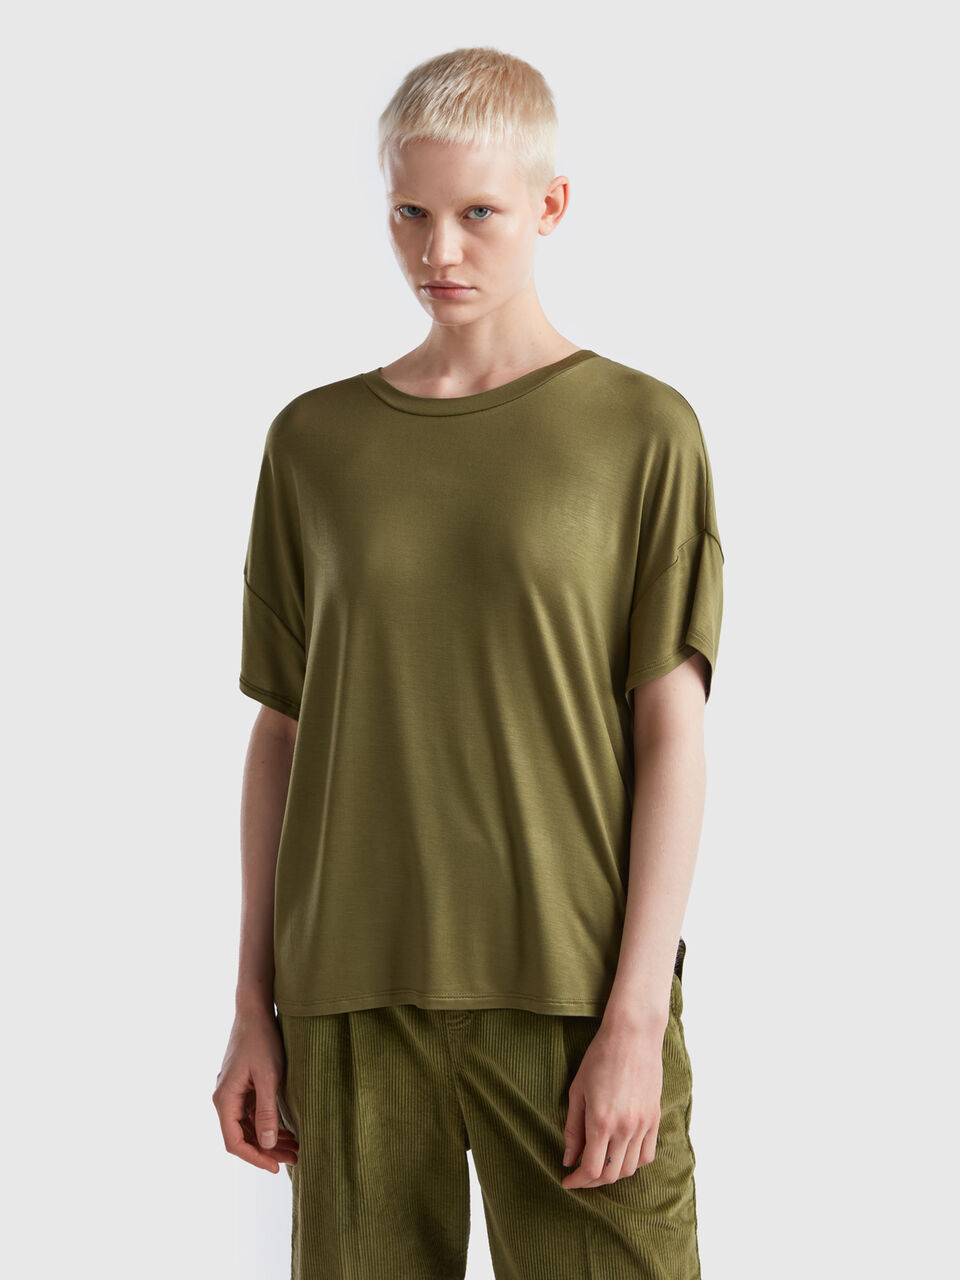 T-shirt in sustainable Green - viscose stretch Military | Benetton